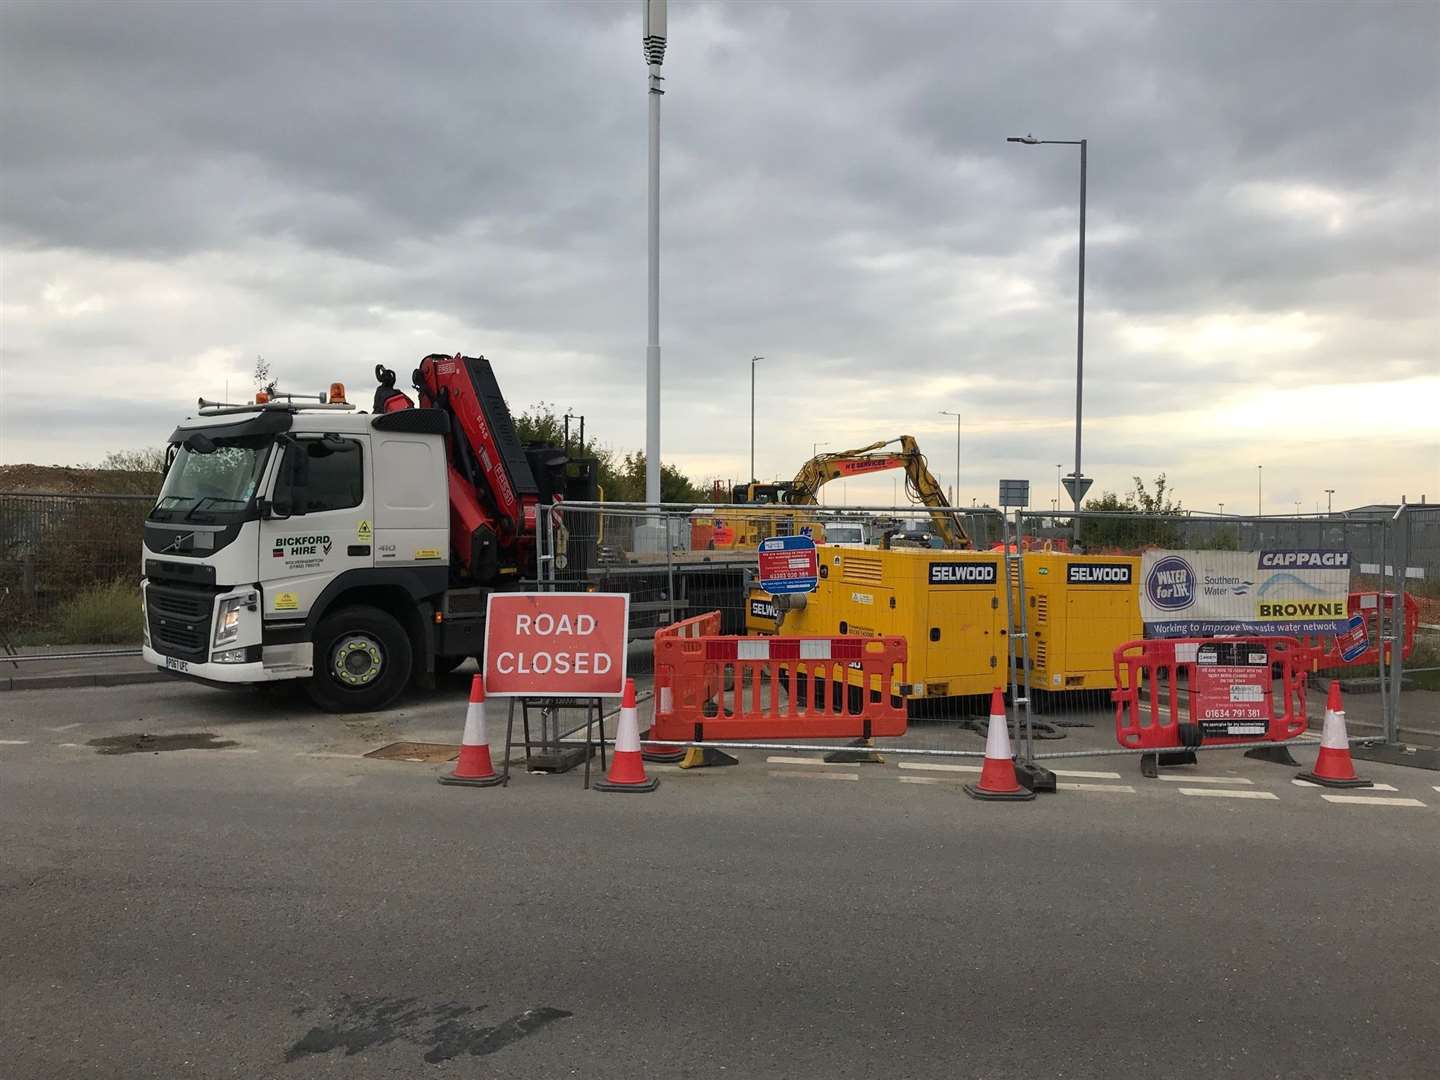 A burst water main means a road closure is going to be extended into next week